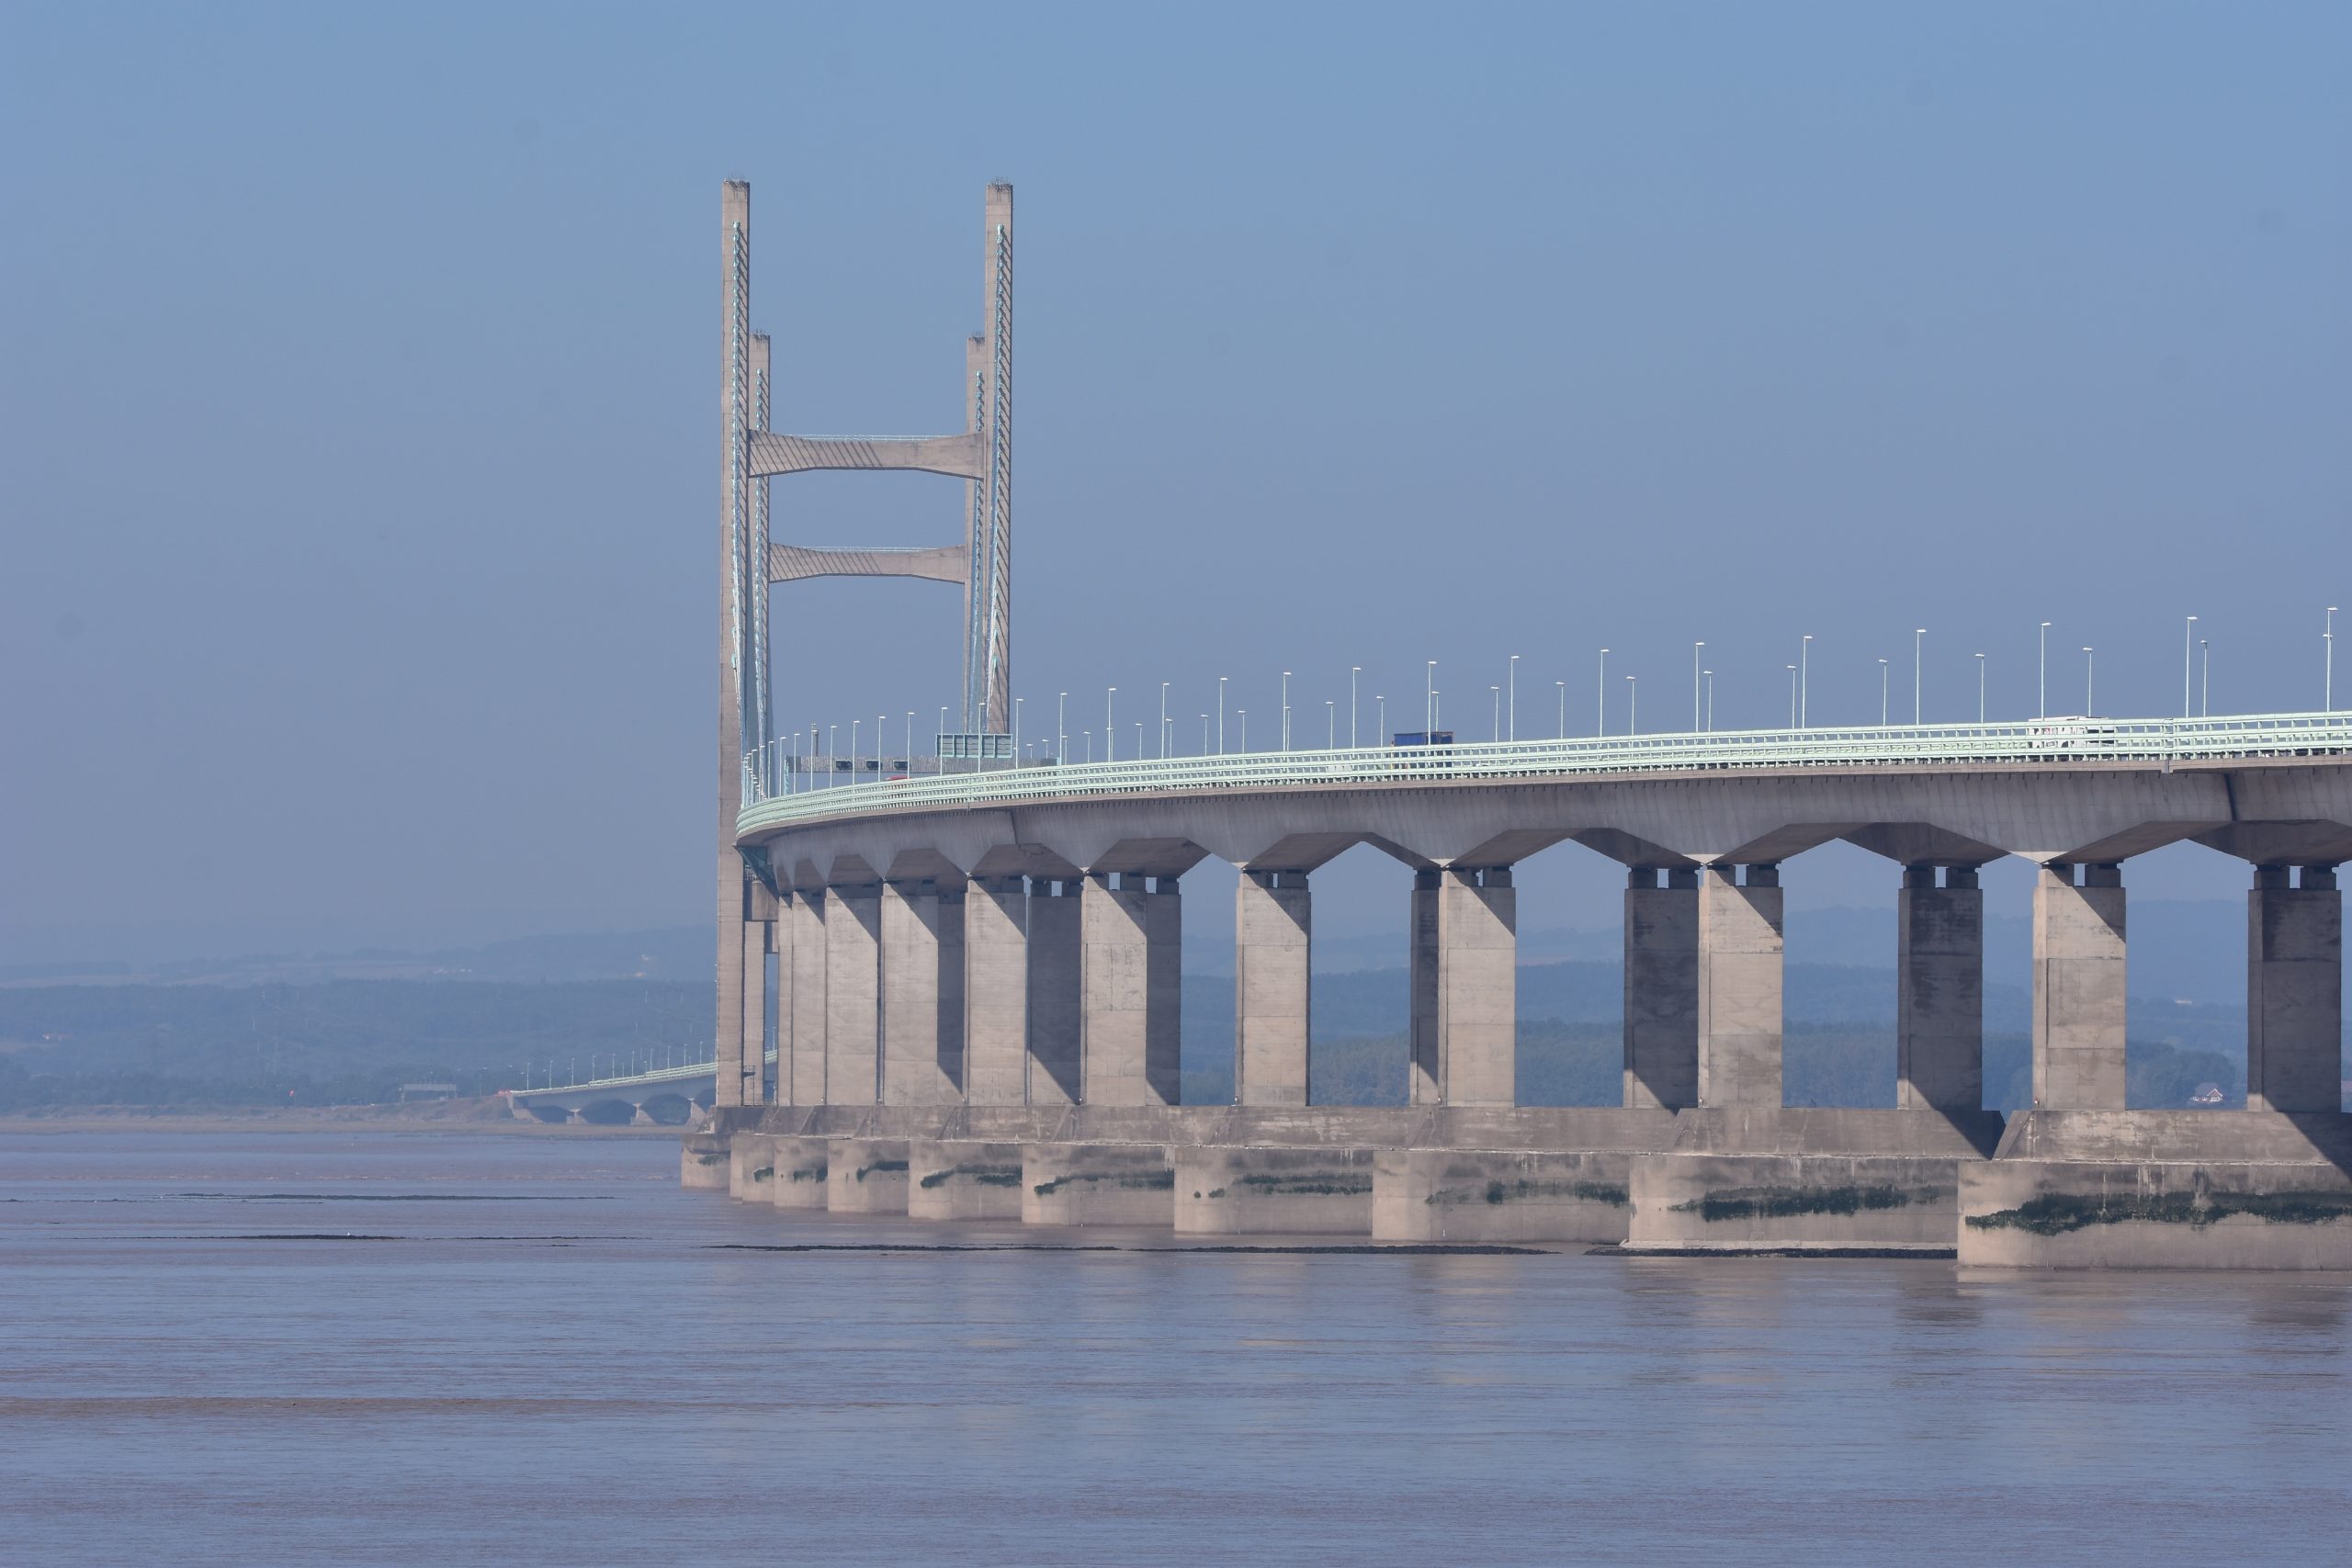 NEWS | Fuel price protest set to cause disruption on the Prince of Wales Bridge (Severn Crossing) on Monday